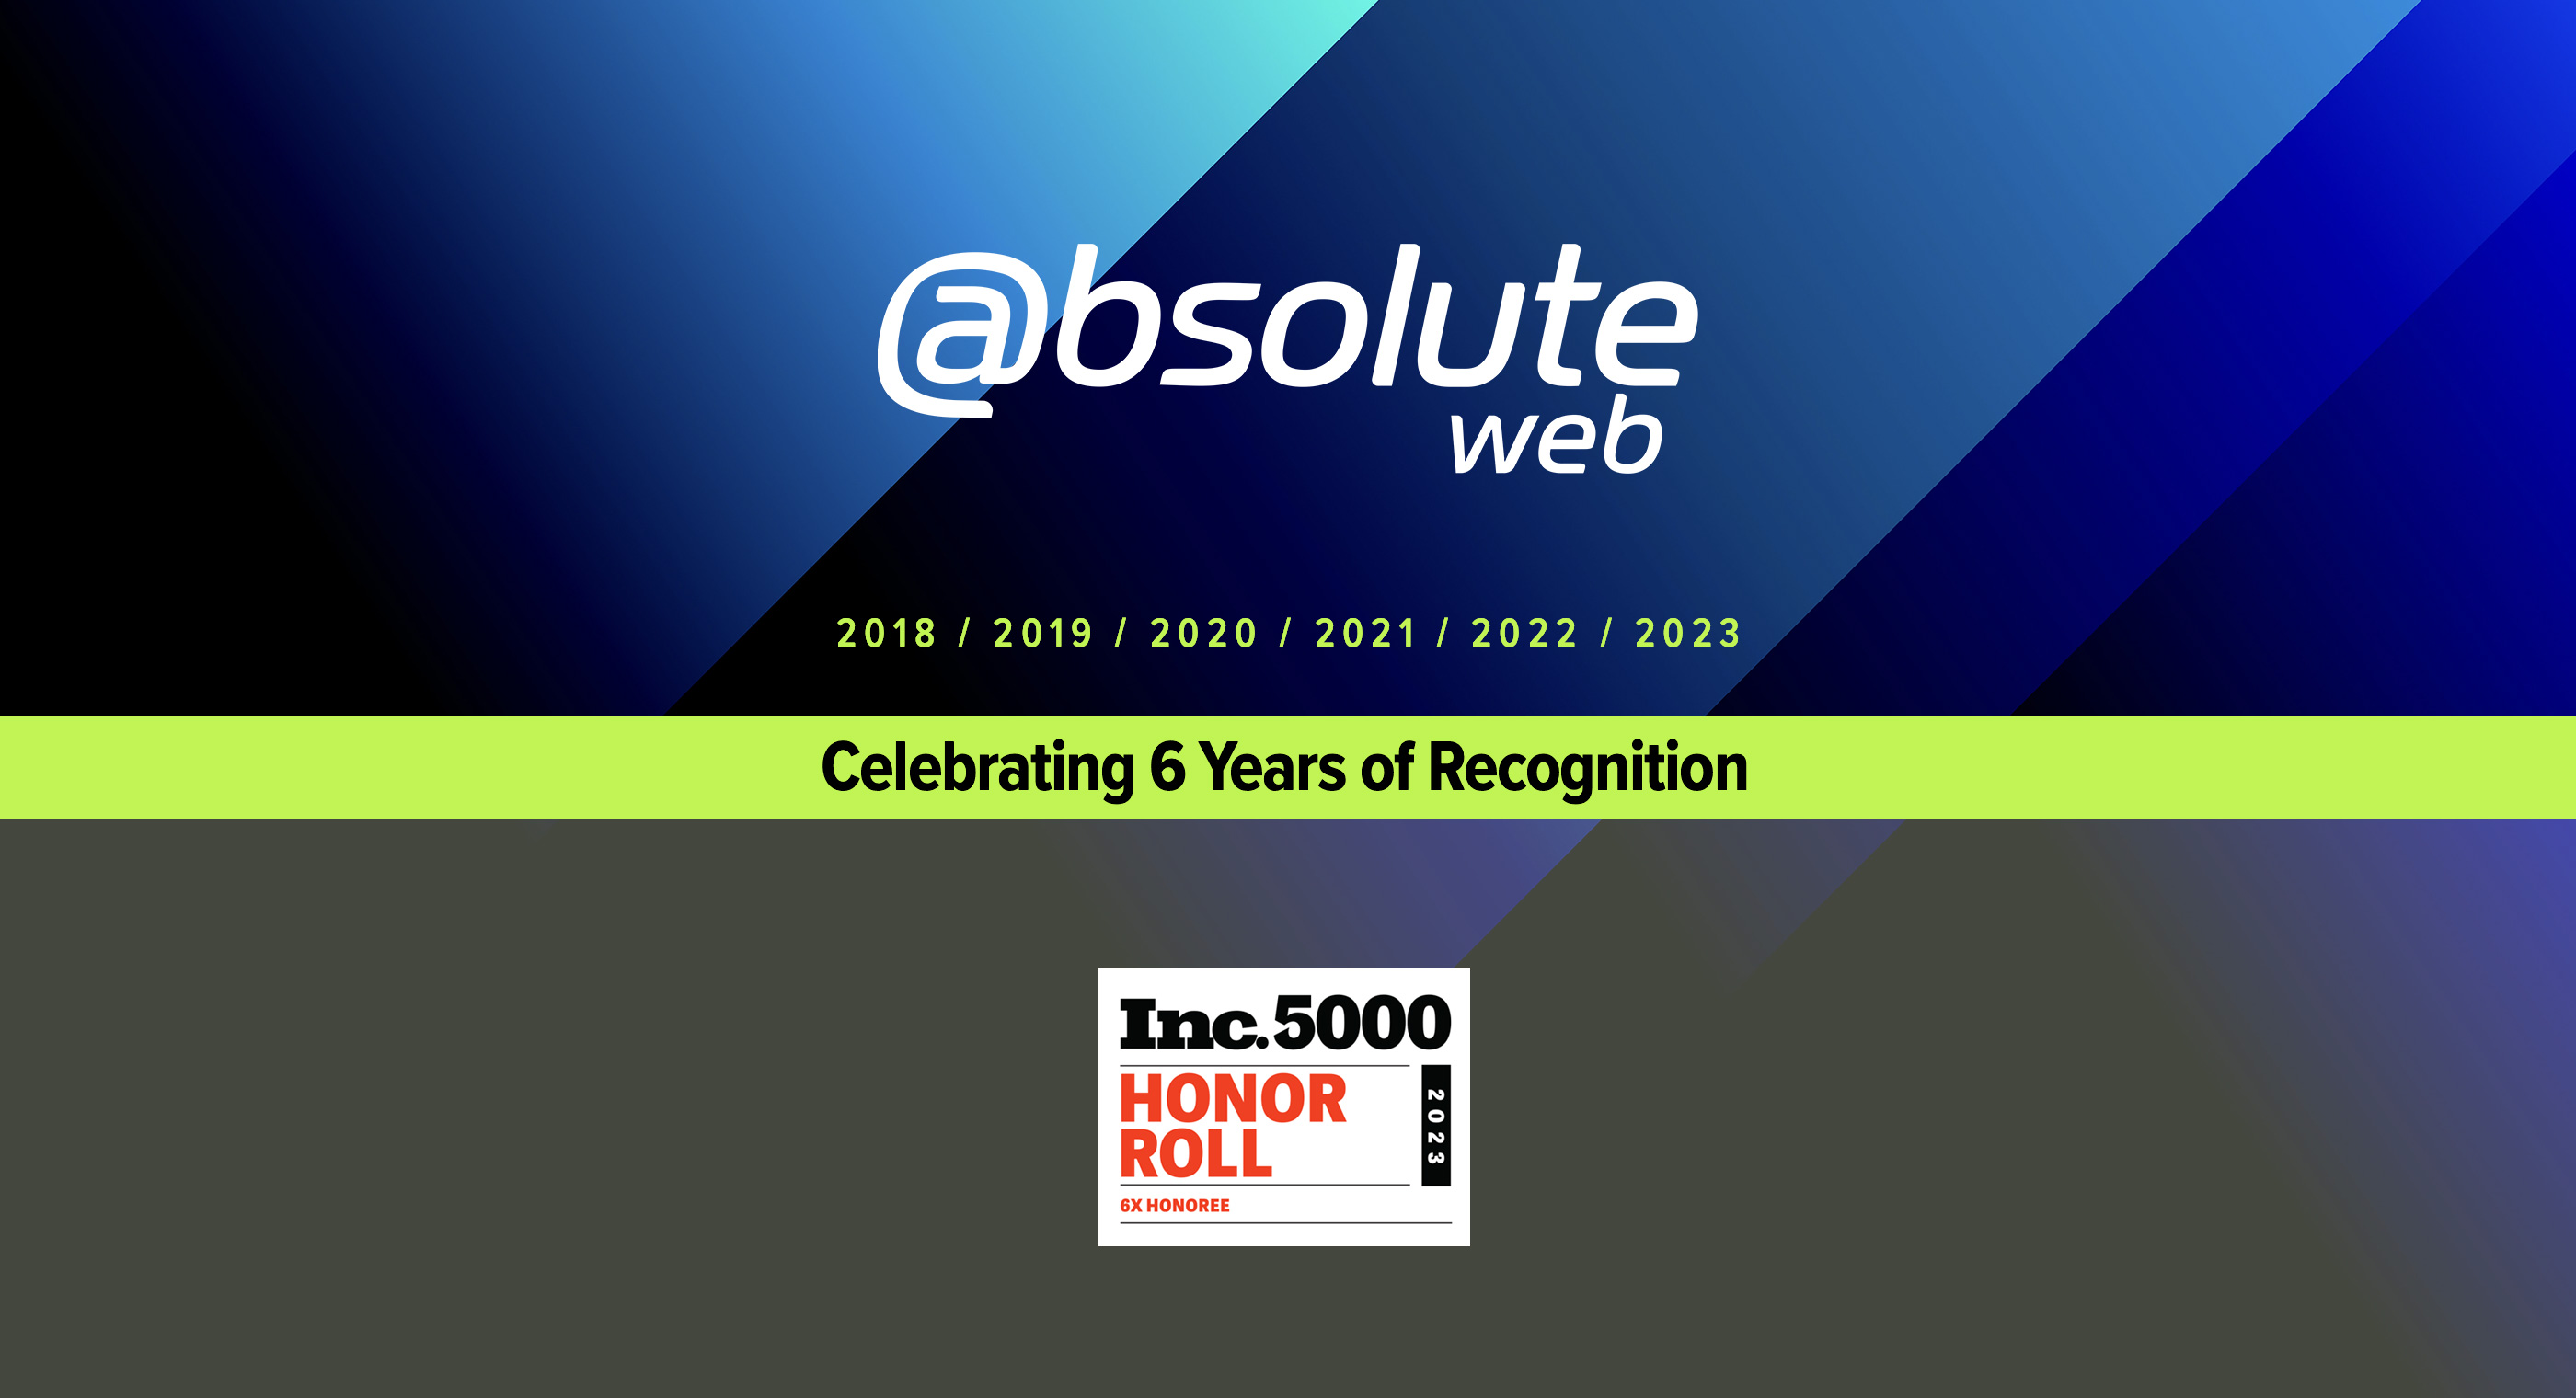 Absolute Web celebrating 6 years of recognition by Inc. 5000